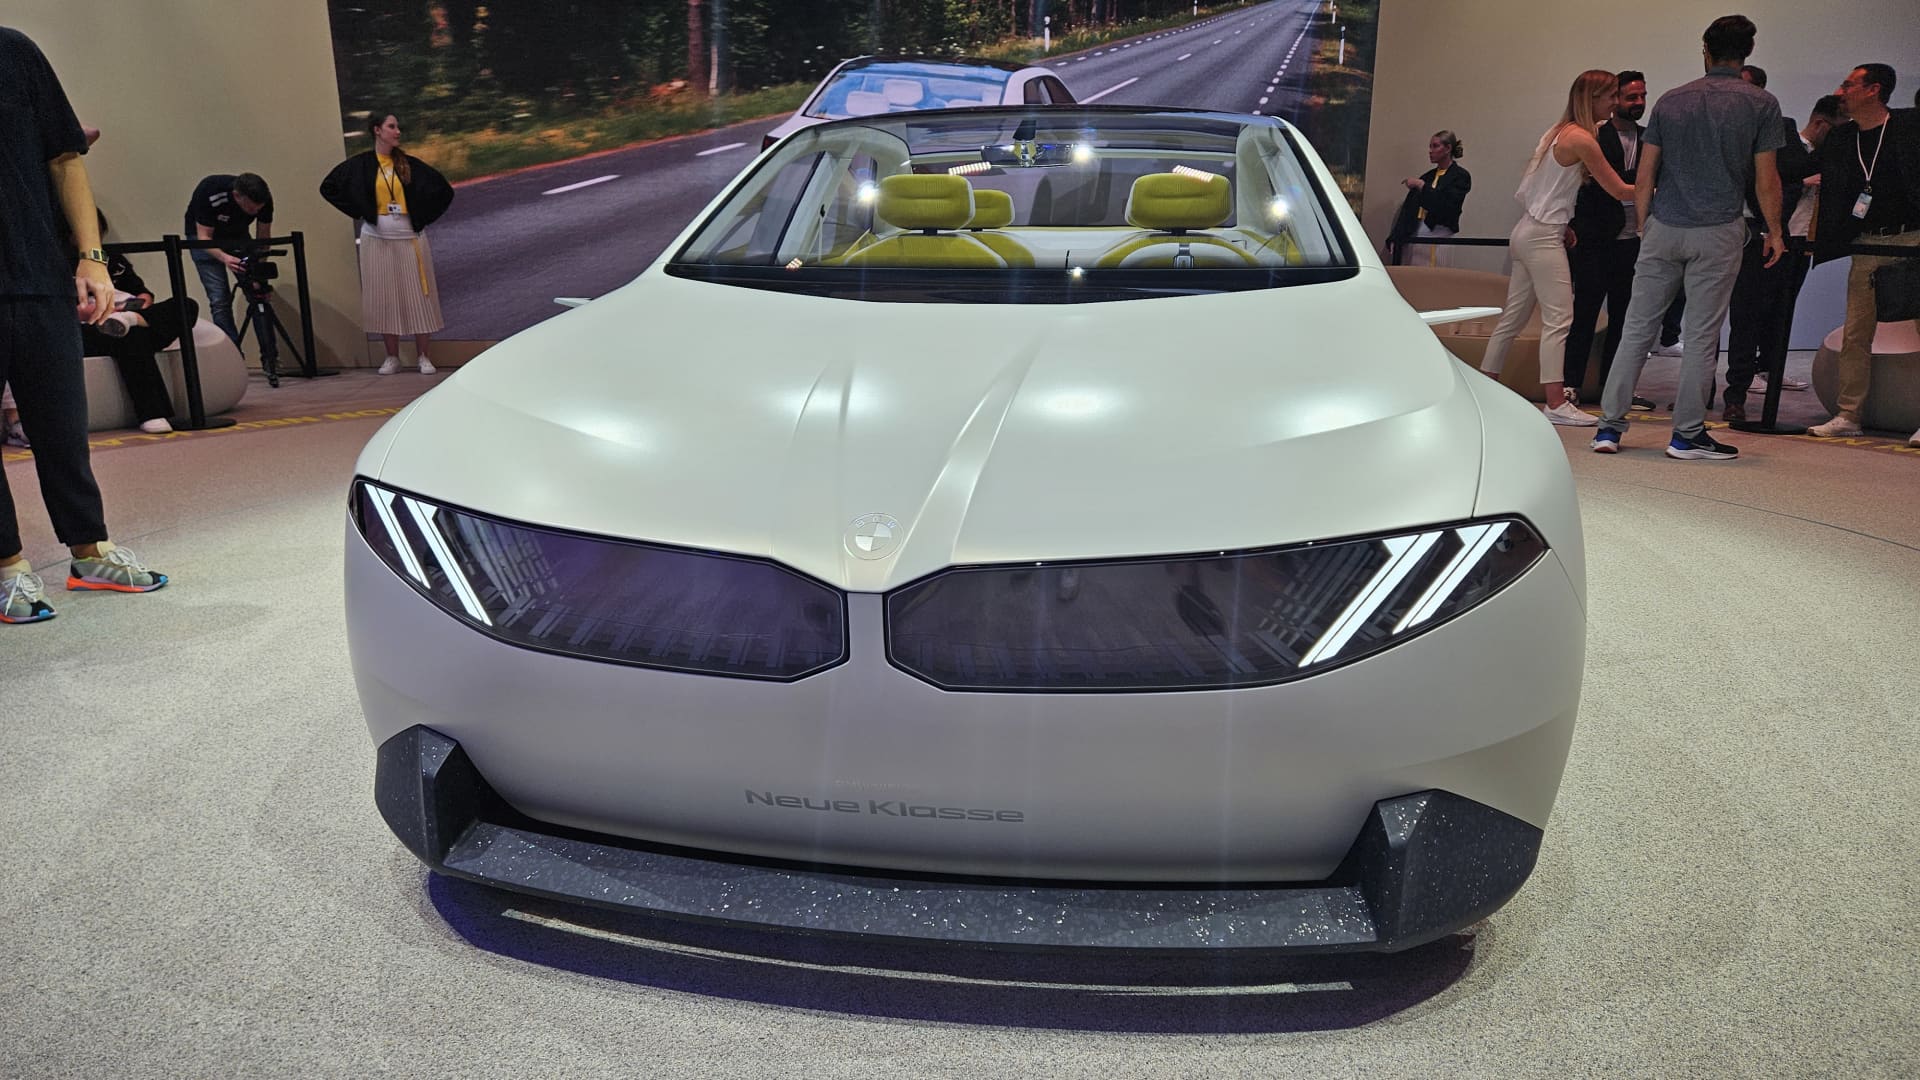 BMW revealed the BMW Vision Neue Klasse, a concept electric vehicle that will underpin its foray into battery-powered cars.